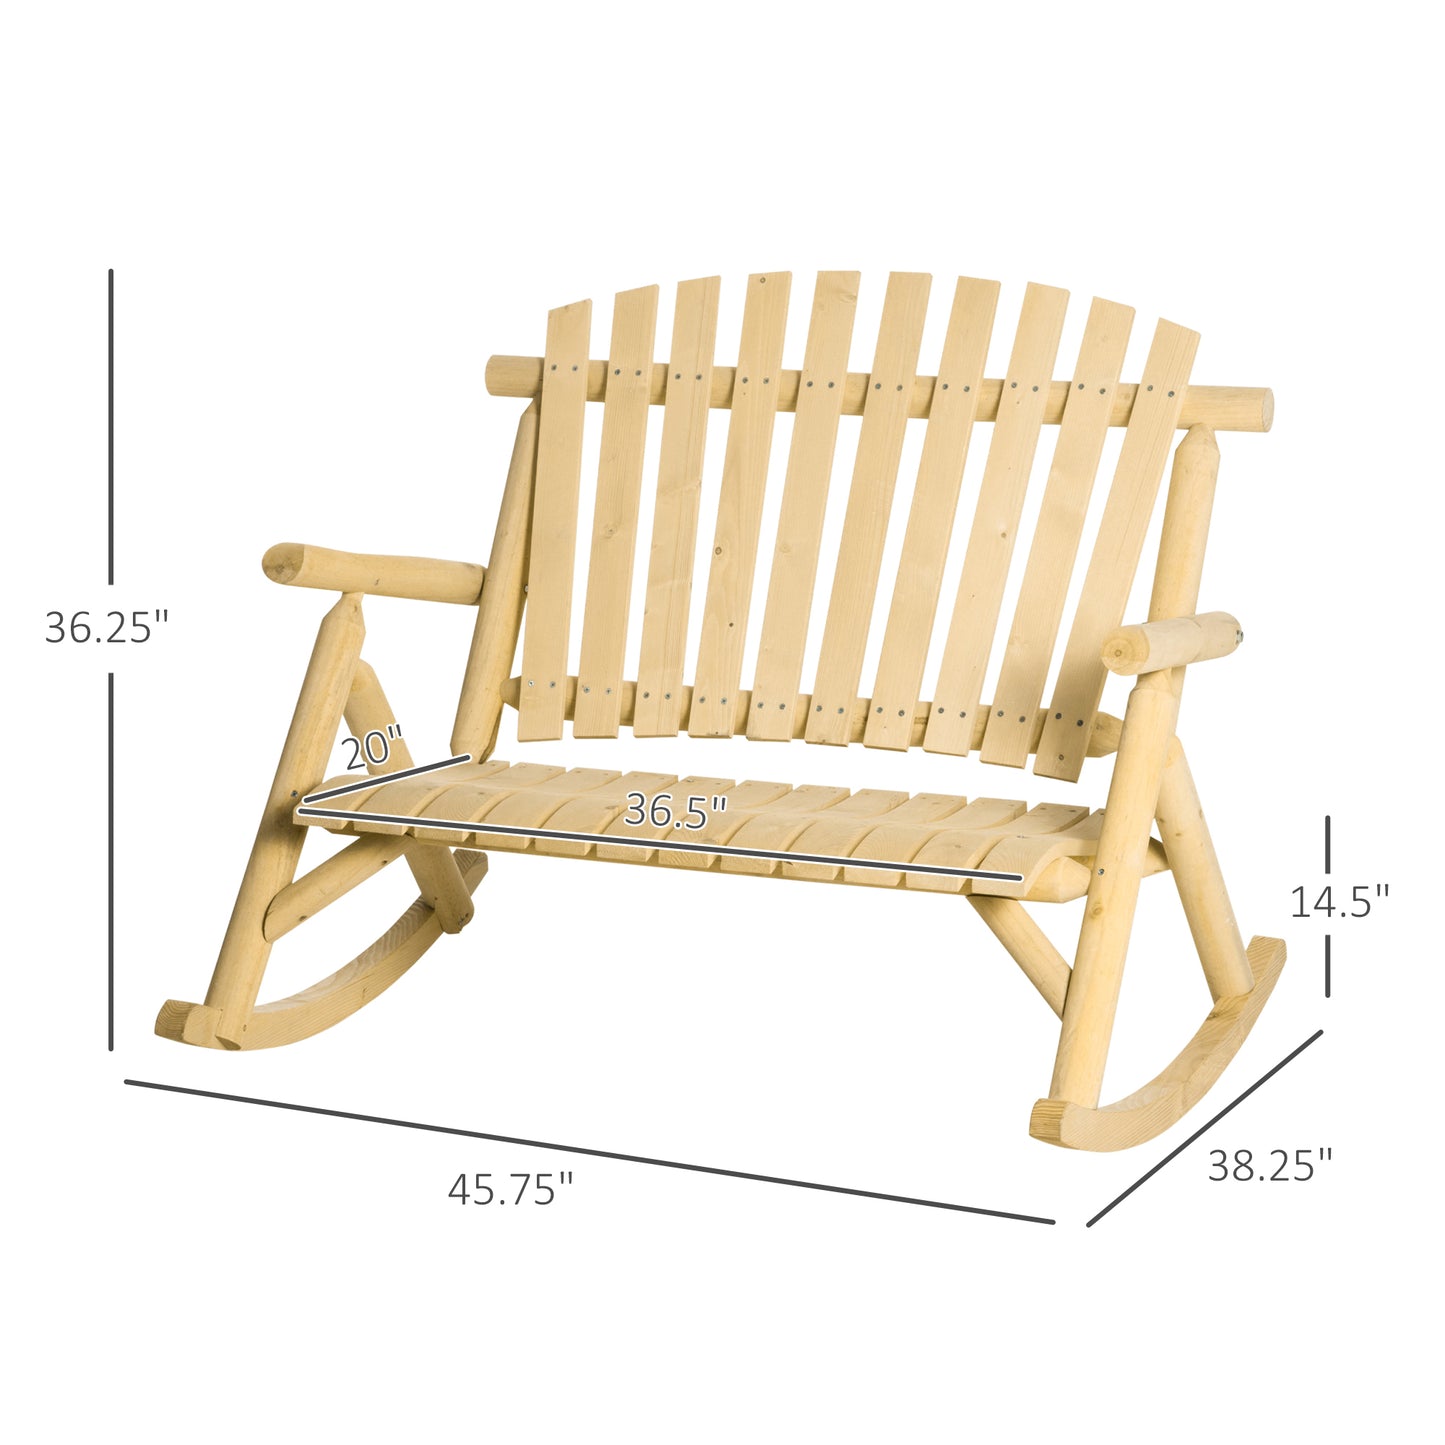 Outsunny Double Wooden Porch Rocking Bench, Adirondack Porch Rocker Chair, Heavy Duty Loveseat for 2 Persons with High Rise Slatted Seat & Backrest, Smooth Armrests, Natural